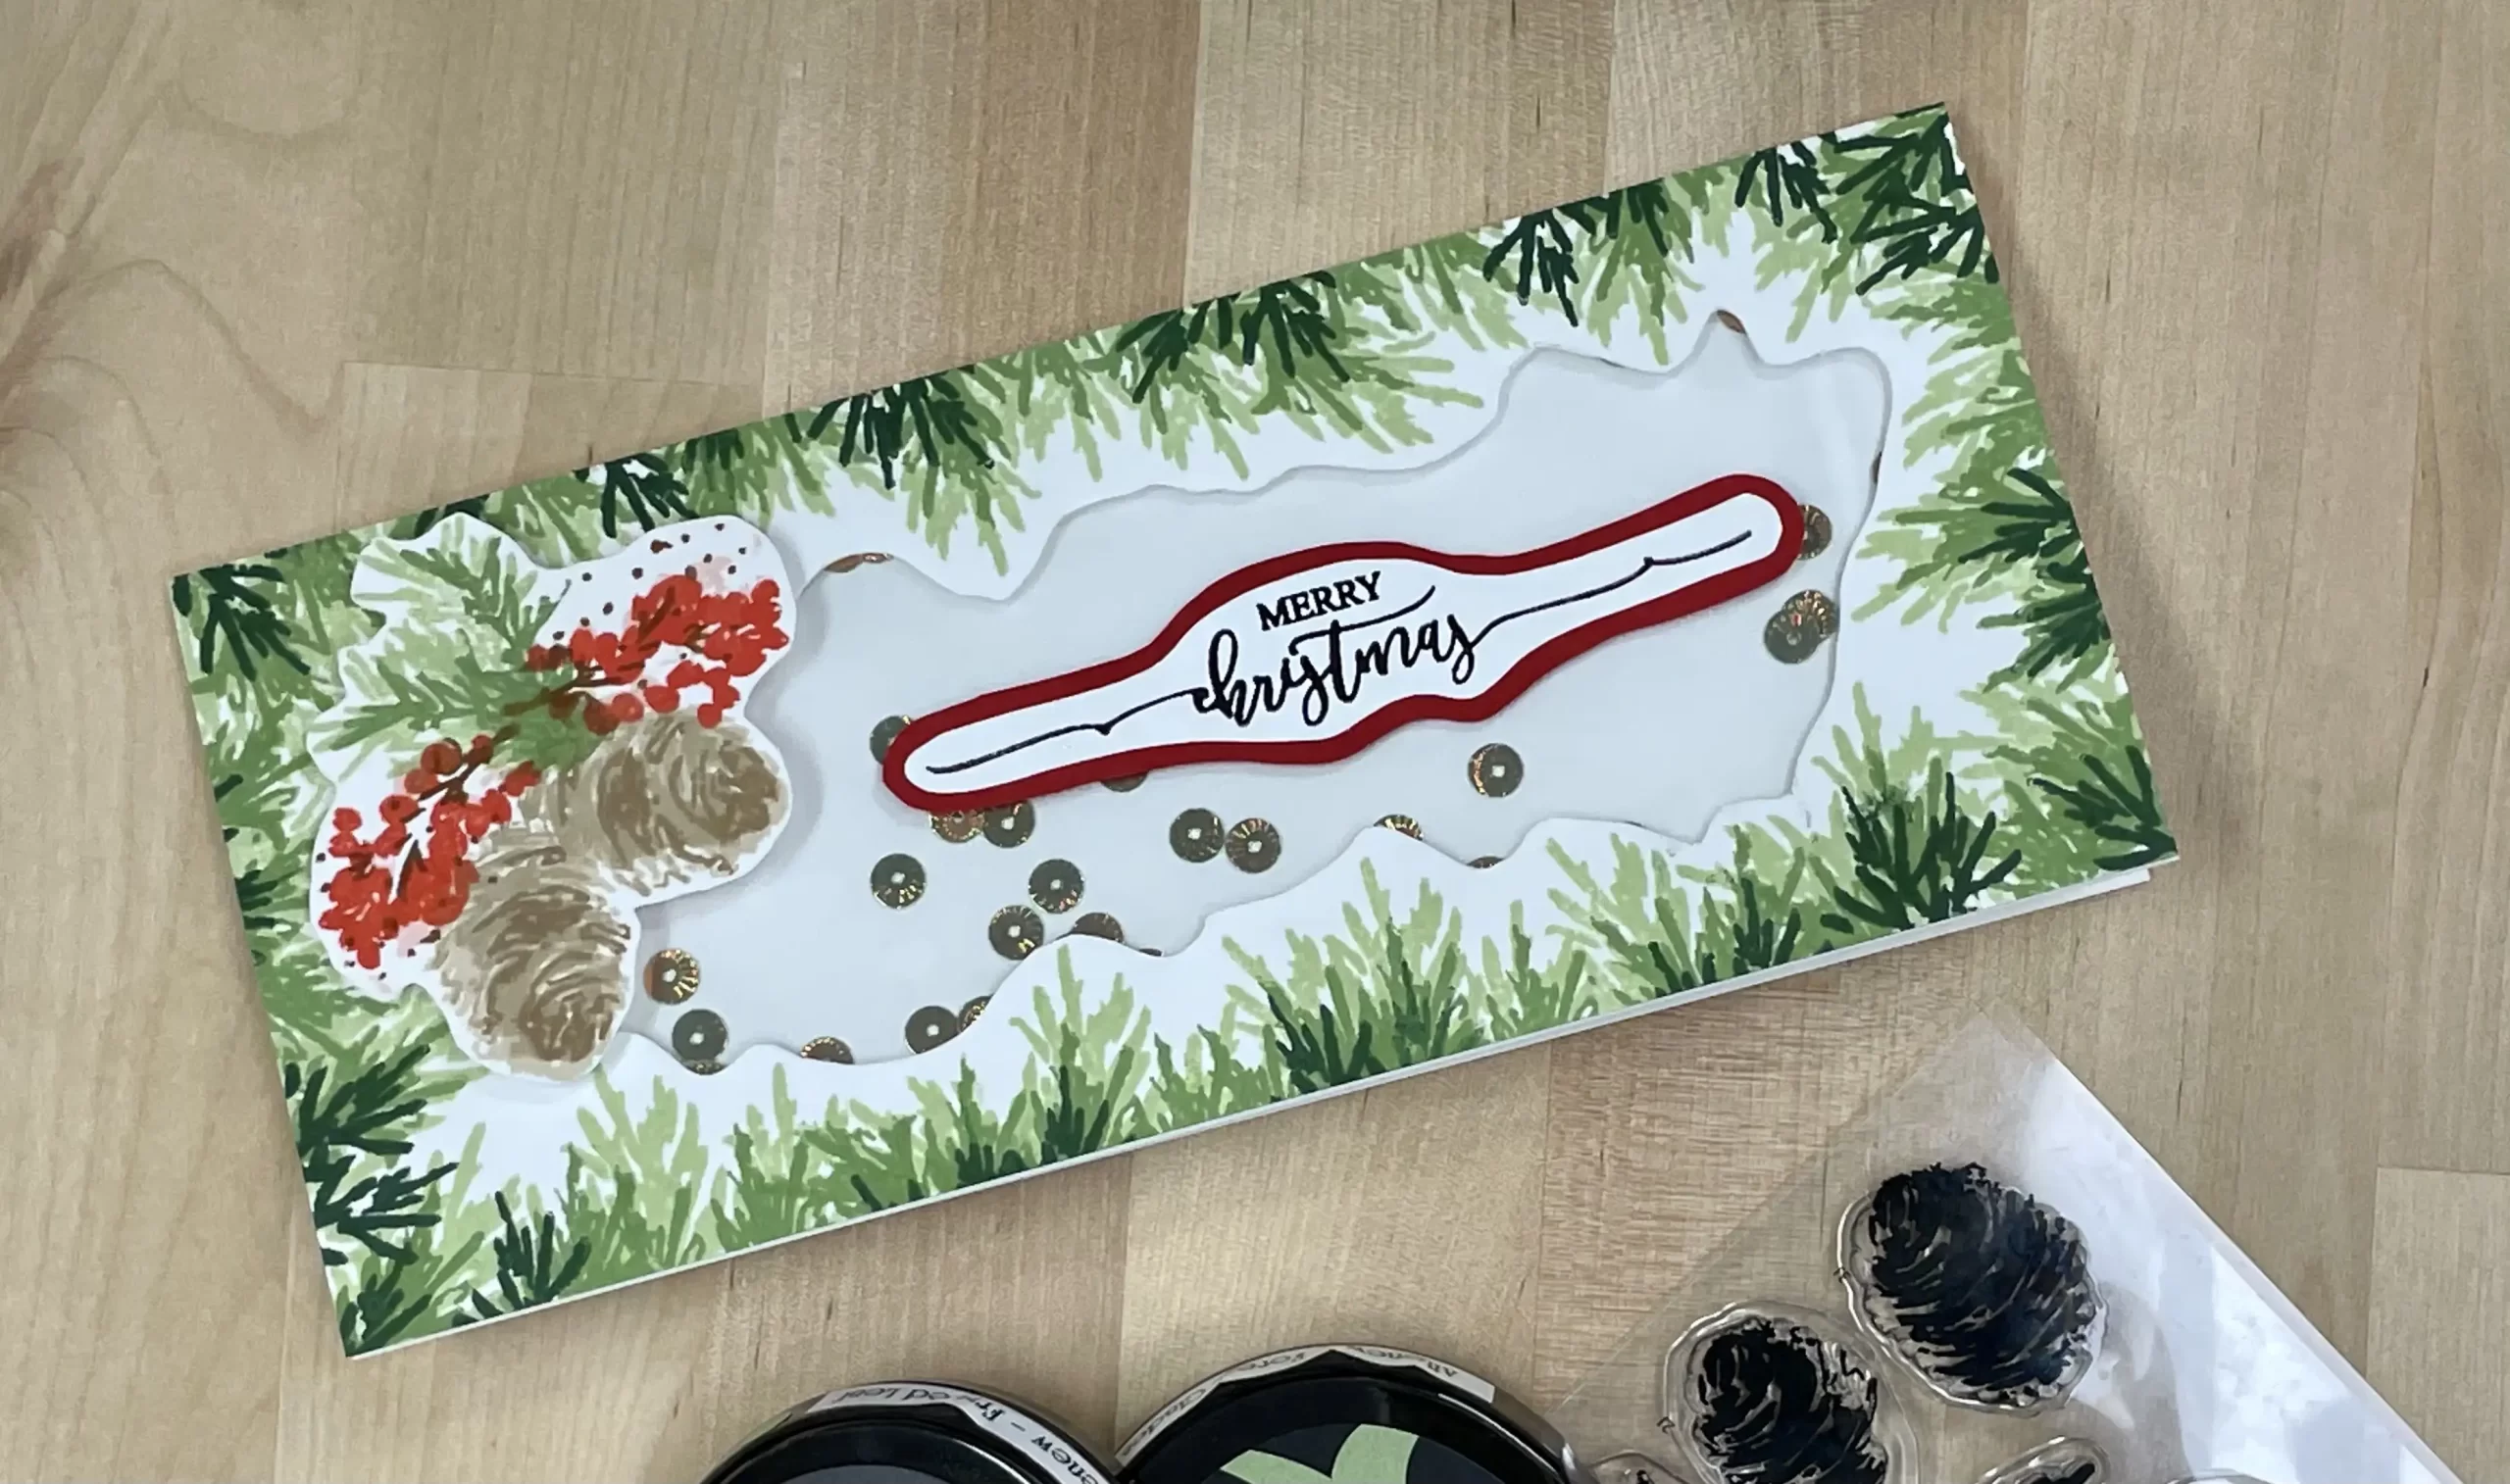 handmade shaker card decorated with pinecones and greenery.